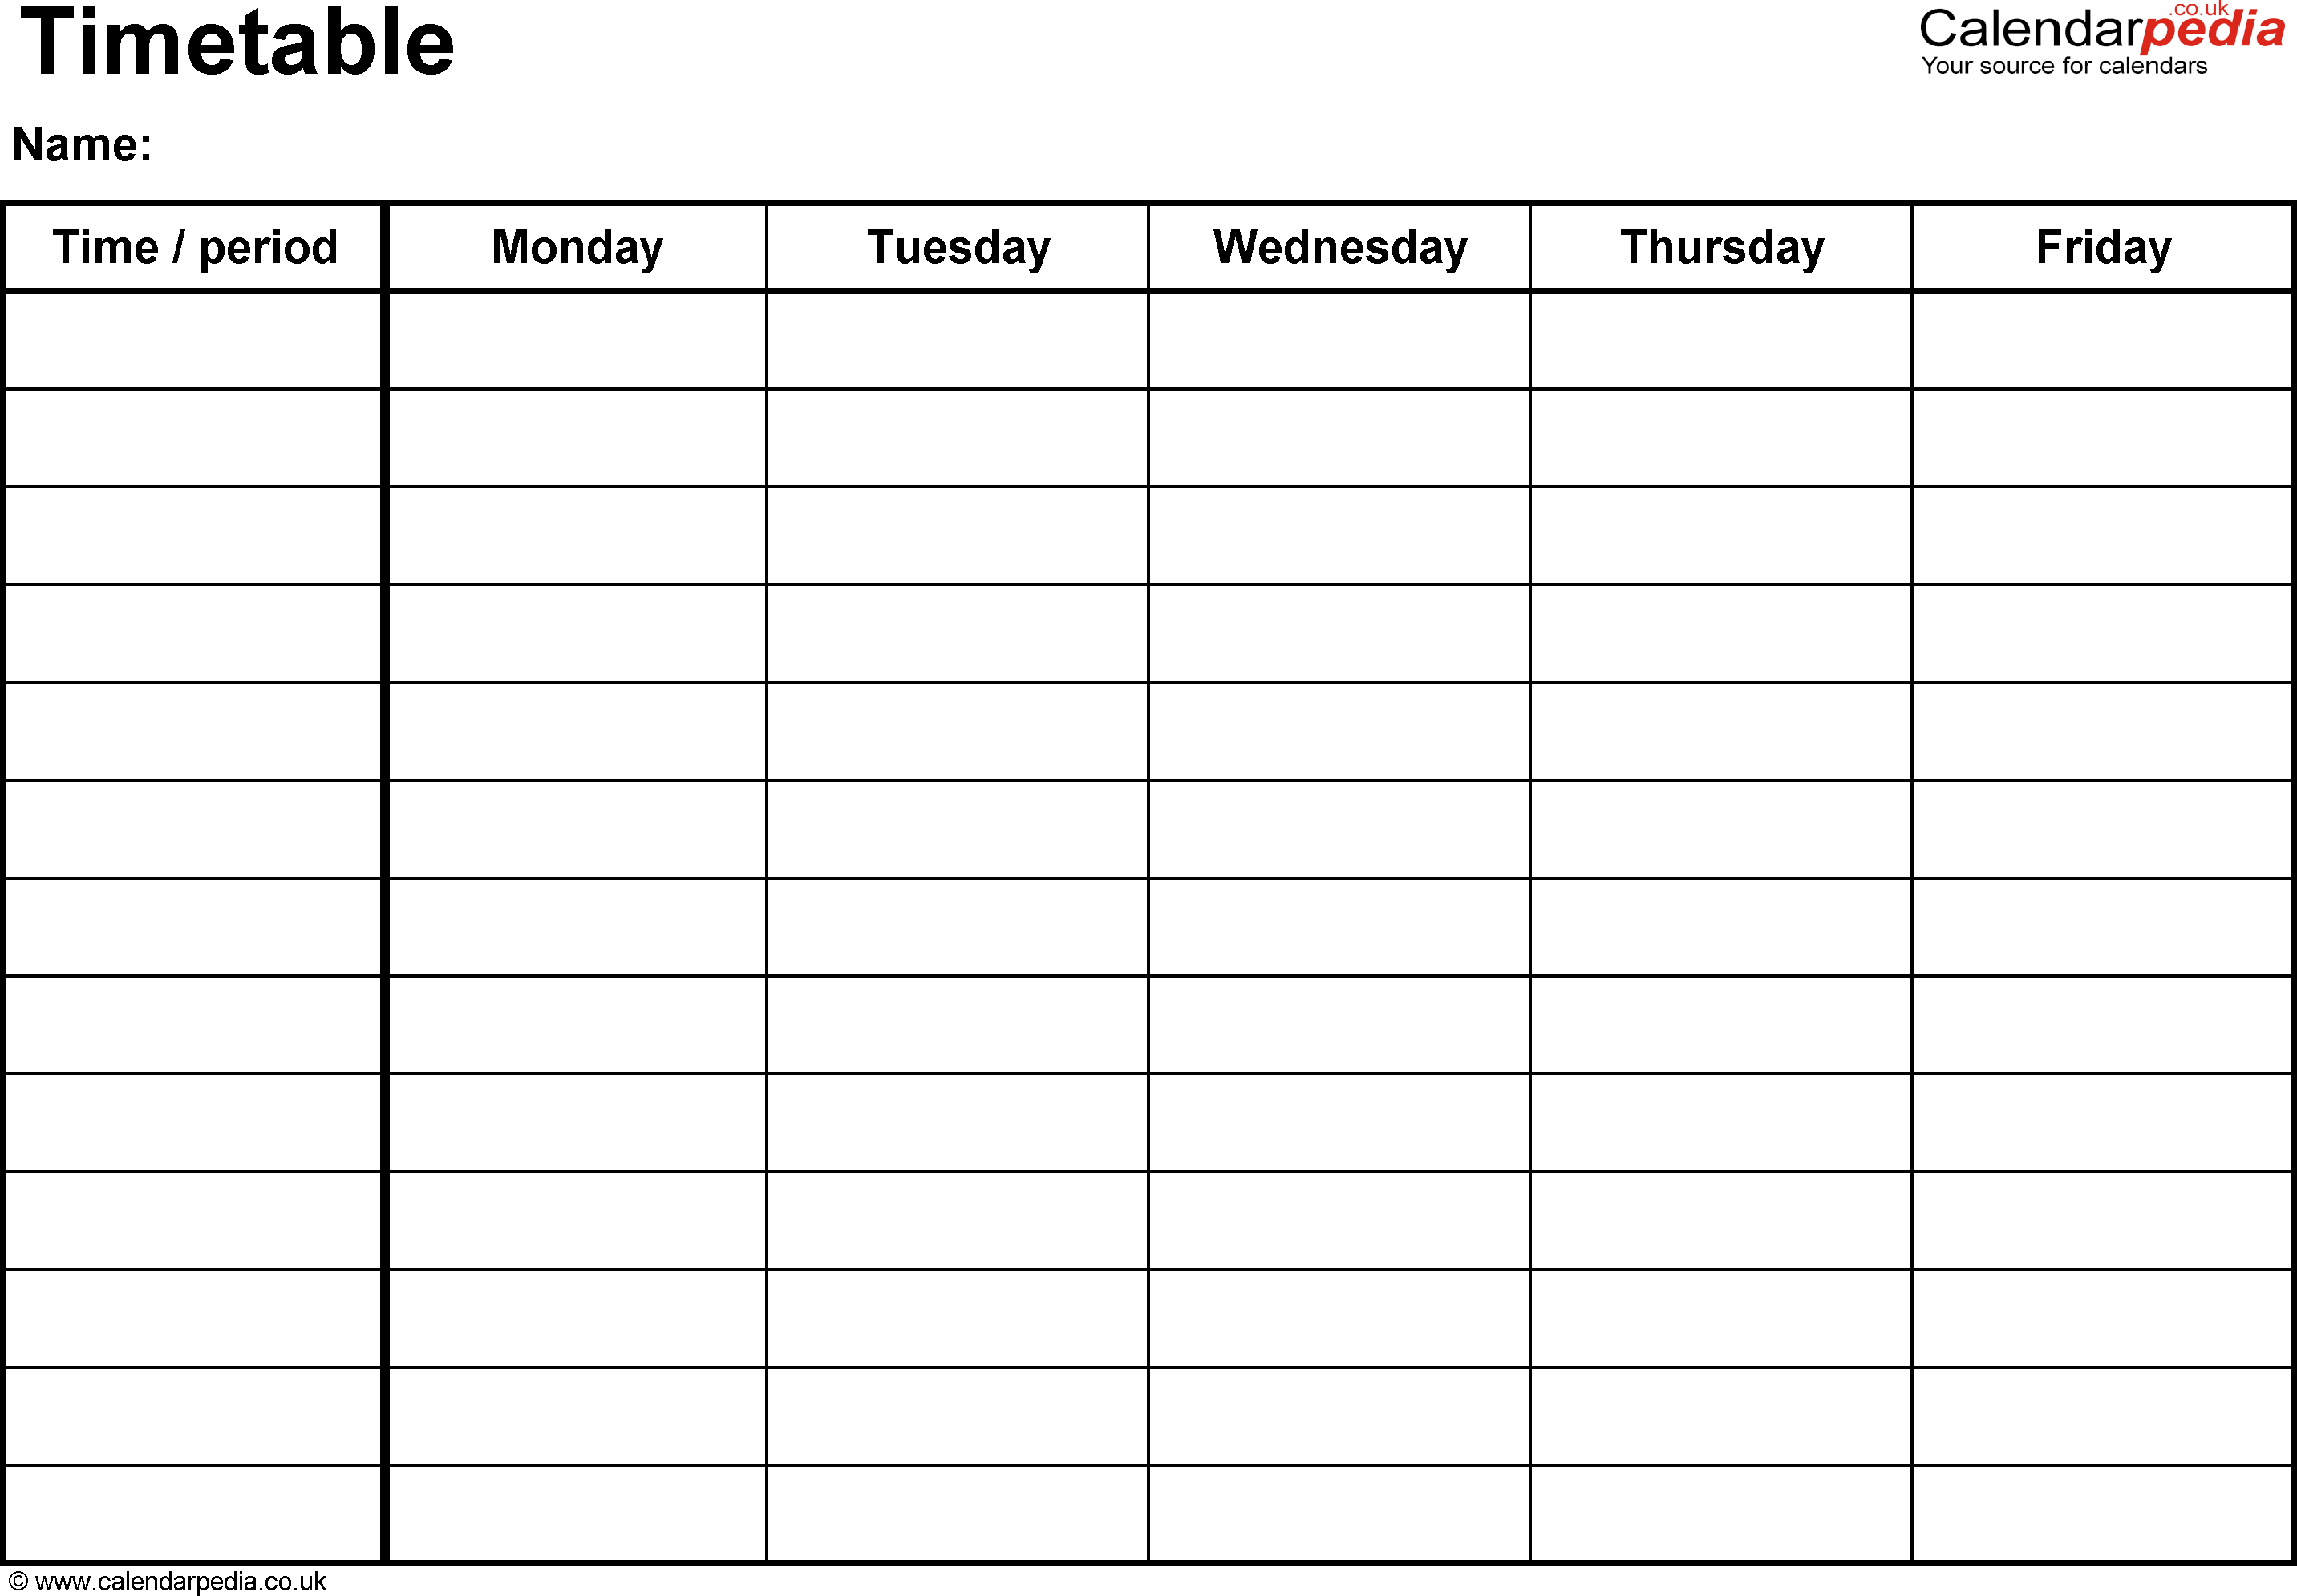 003 Timetable Monday Friday Template Ideas Weekly Schedule inside Monday Through Friday Calendar Template Word